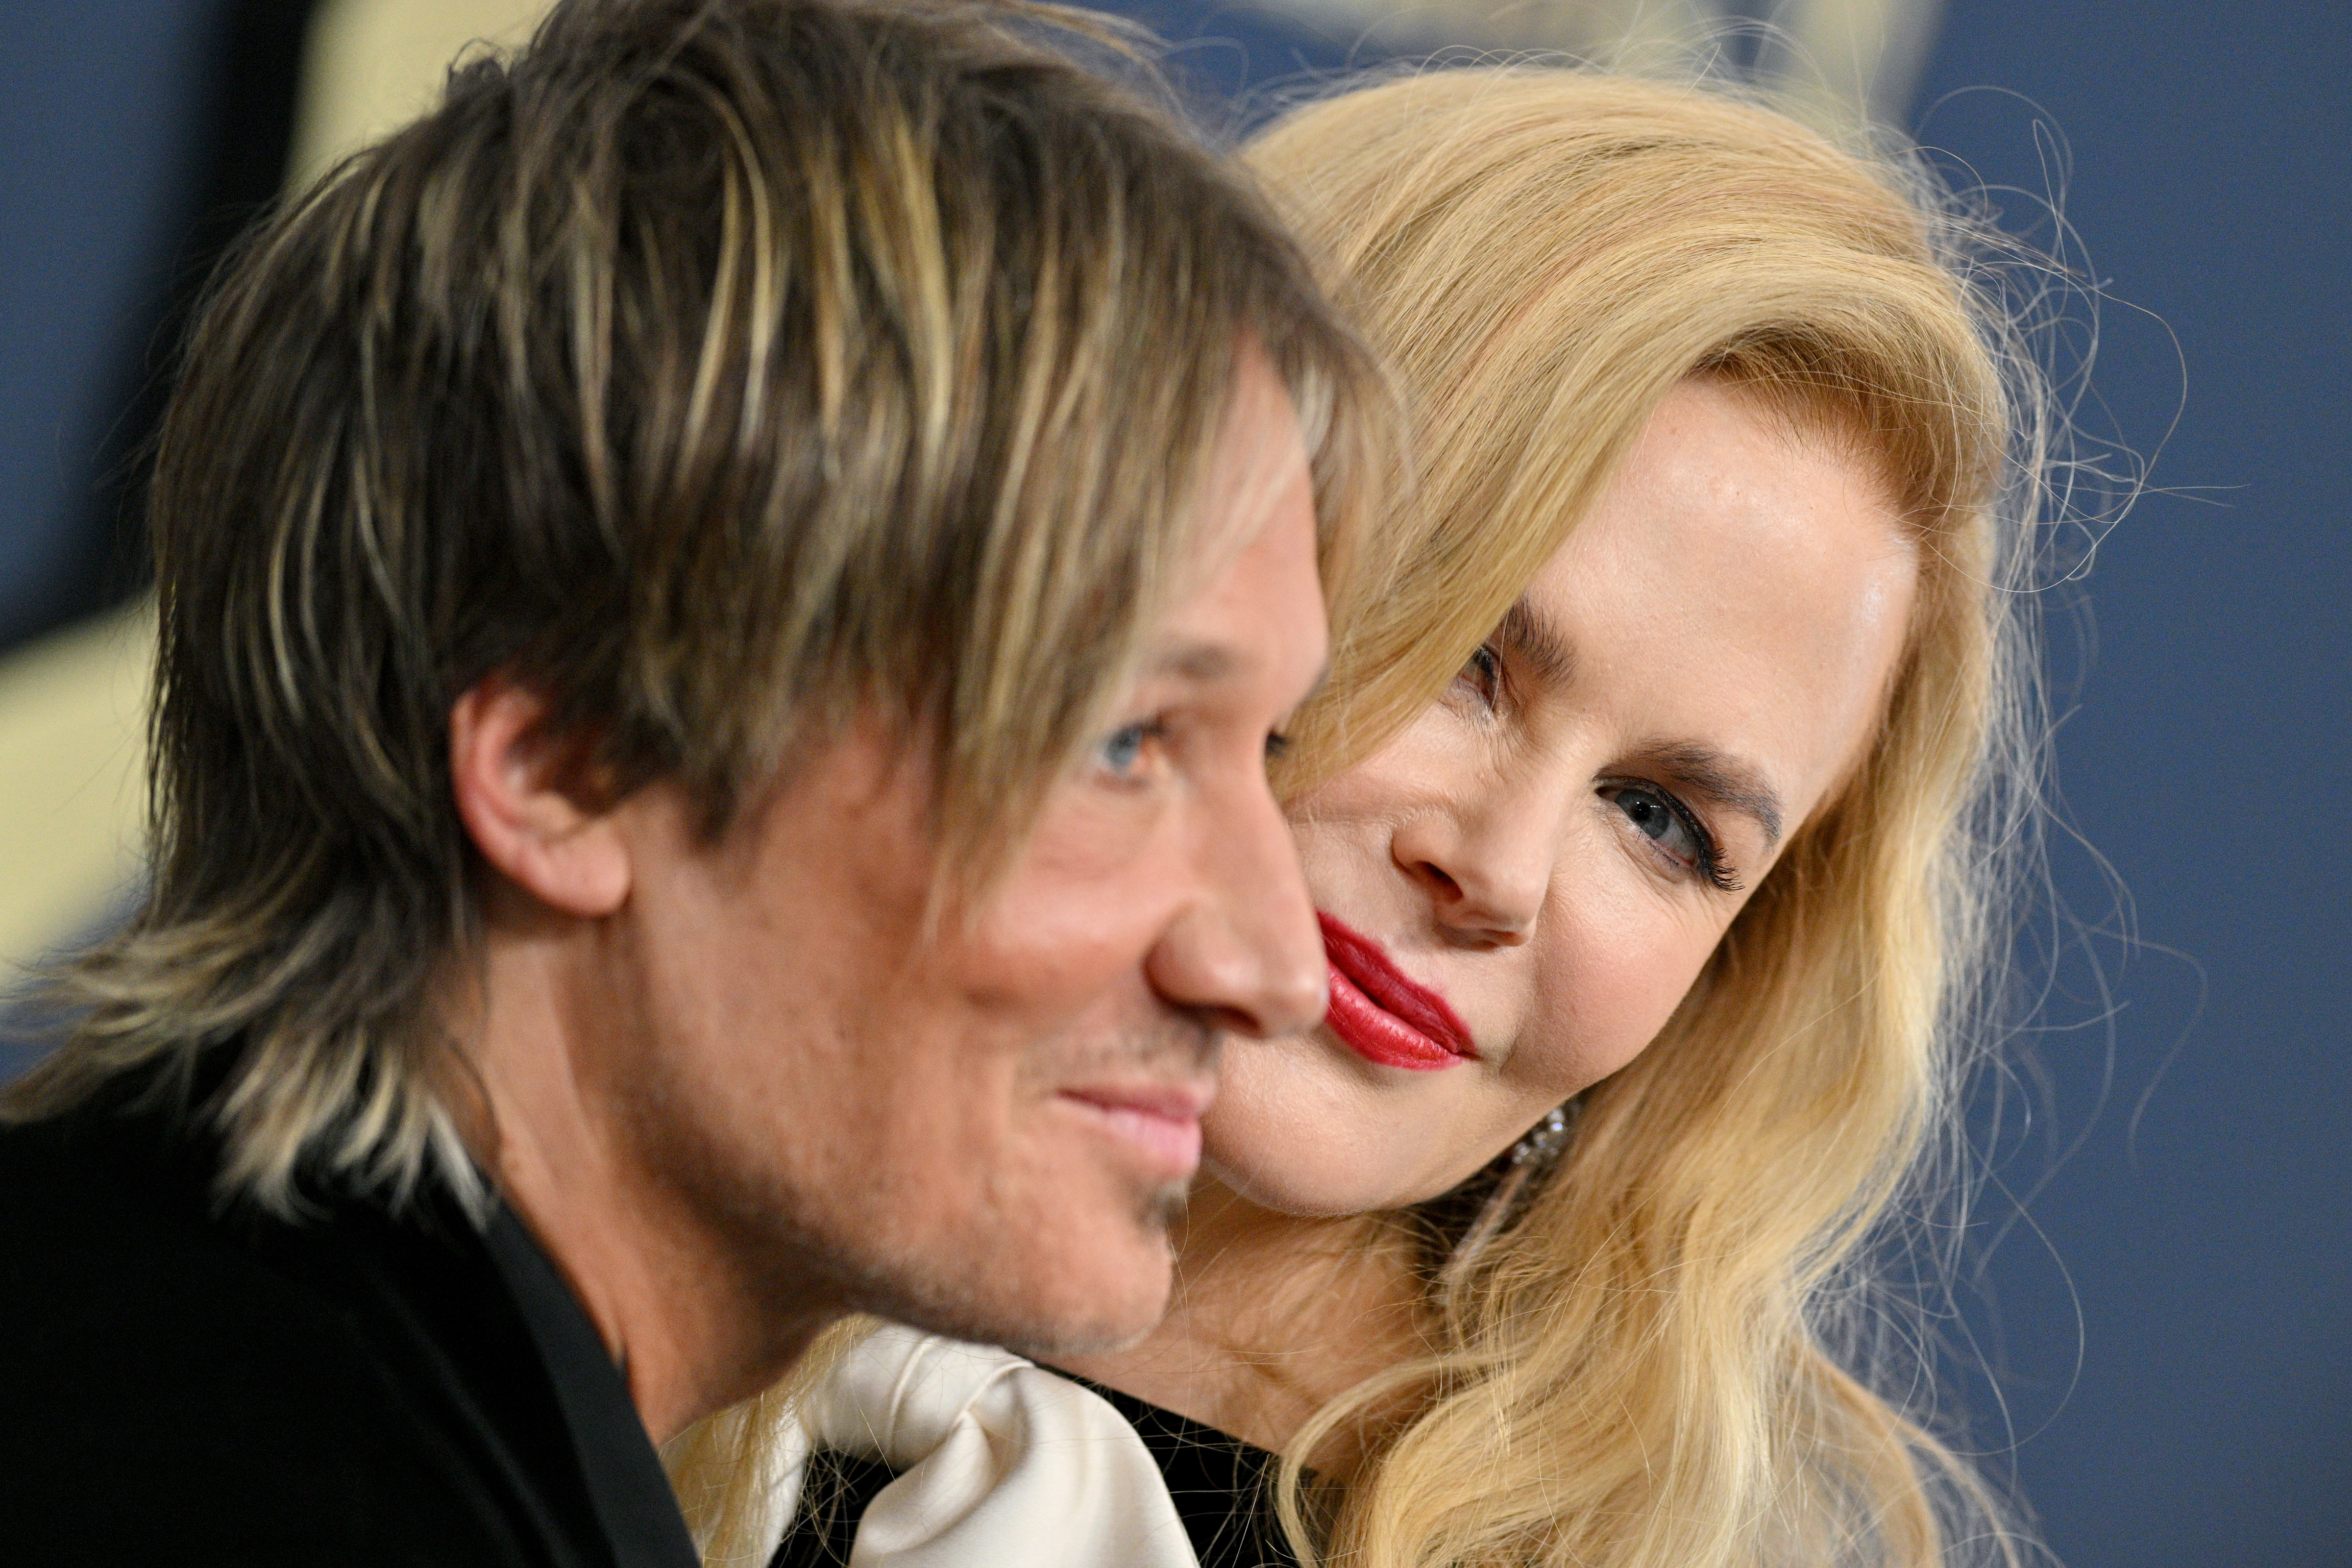 Keith Urban and Nicole Kidman at the 28th Annual Screen Actors Guild Awards | Source: Getty Images